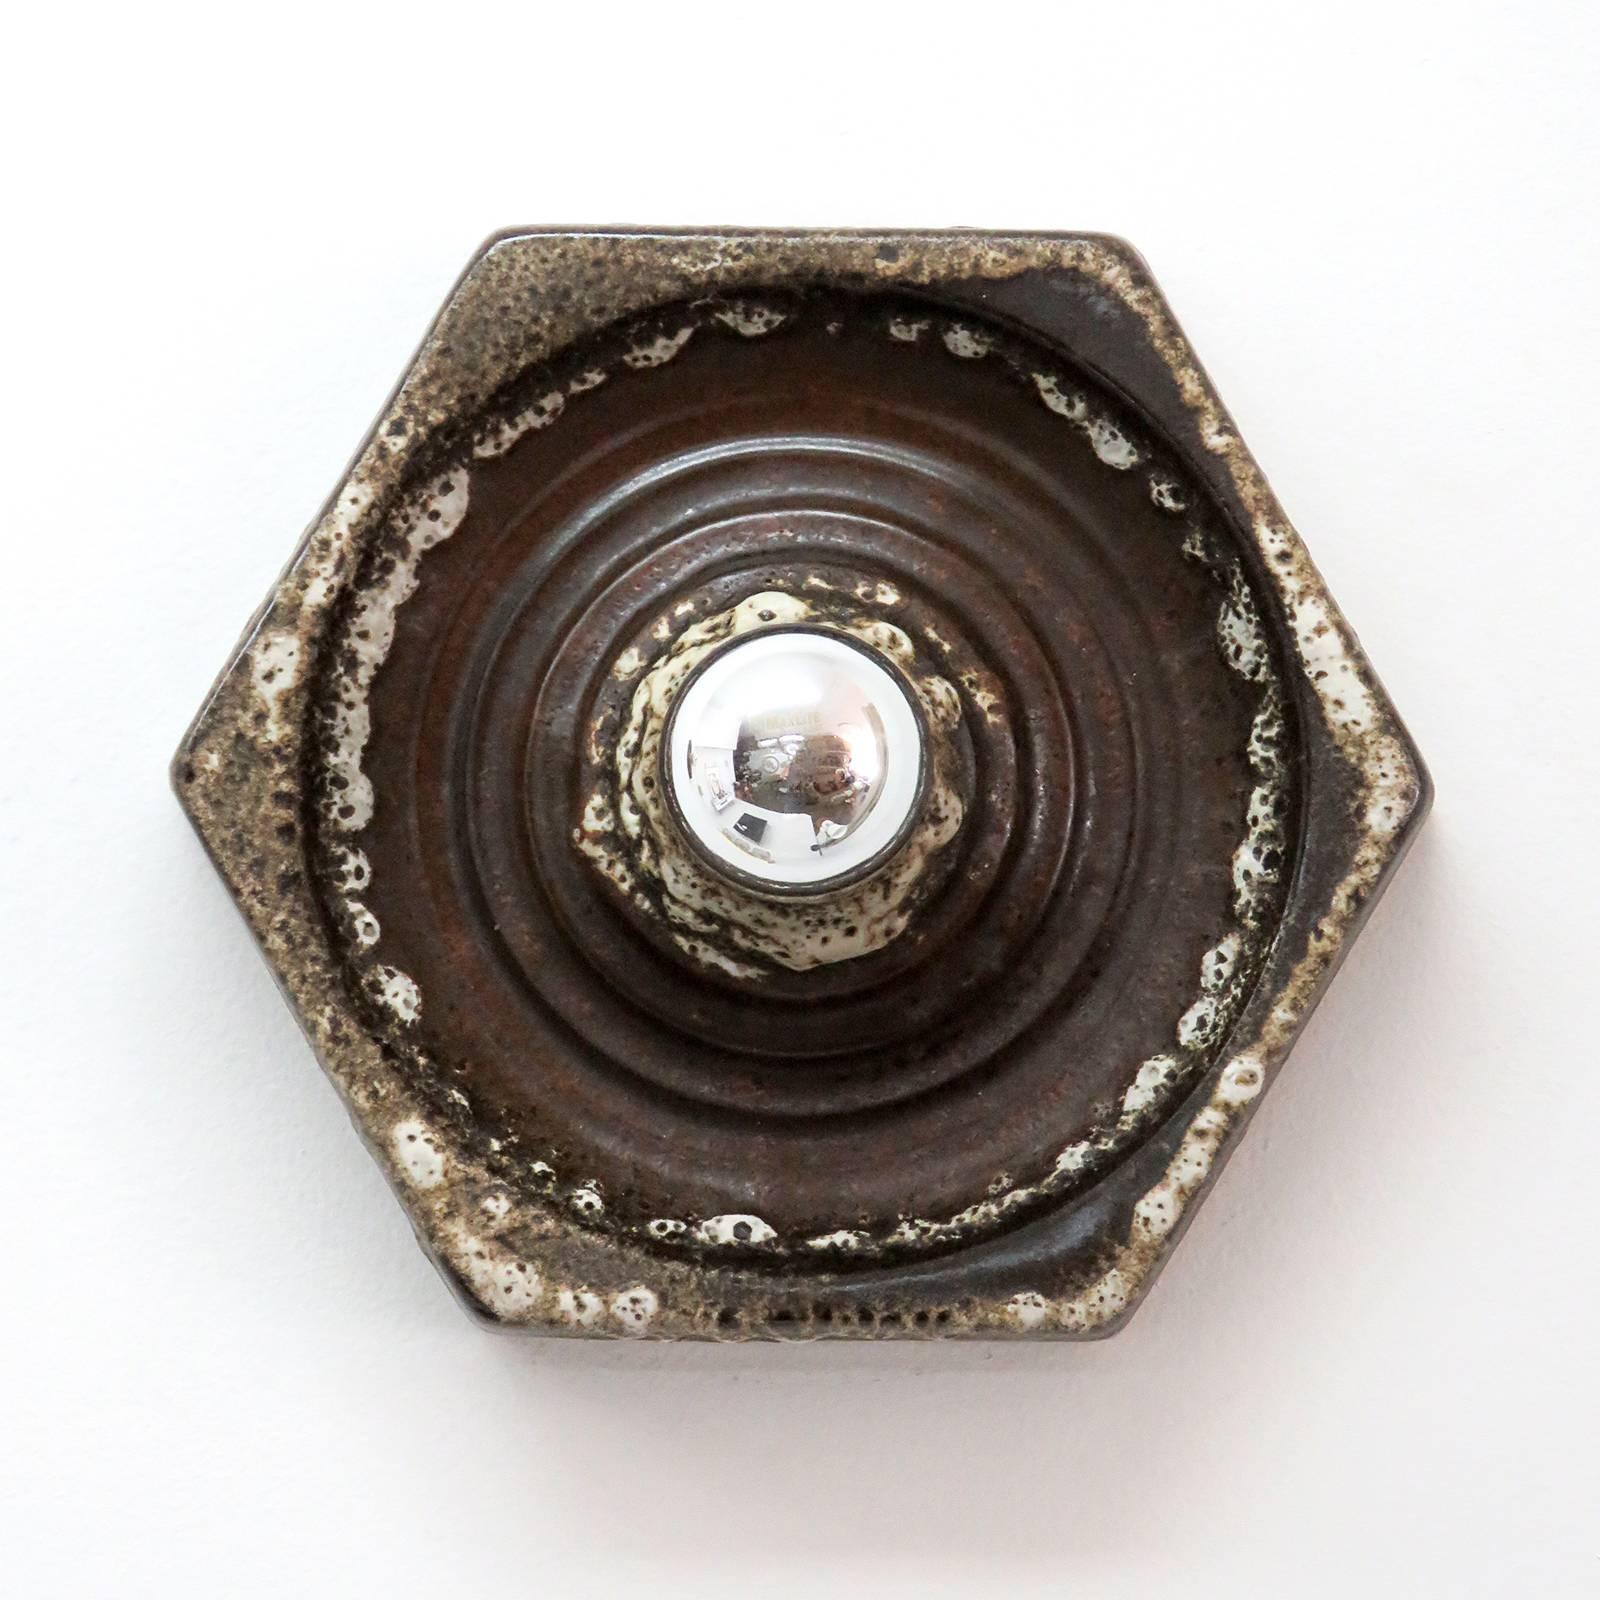 Great multi-tone hexagonal German ceramic wall sconces from the 1960s. Single bulb wall lights/flush mounts shown with a mirror tip bulb that casts a wonderful shadow play against the wall (depth measurement without light bulb). Priced individually.